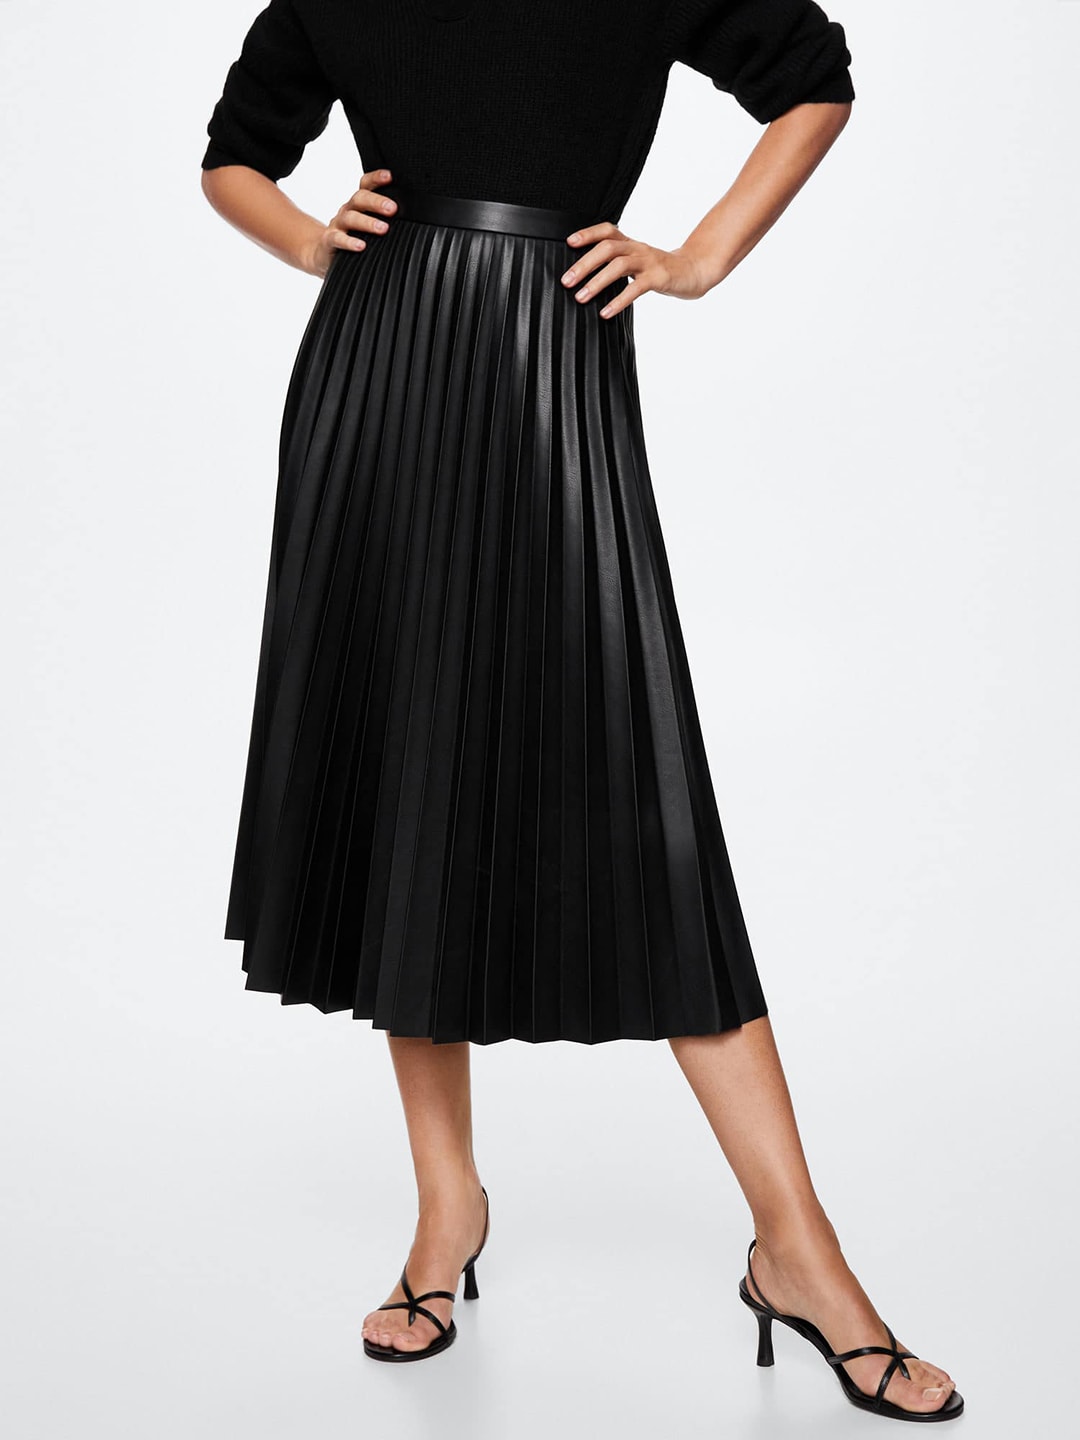 MANGO Women Faux Leather Accordion Pleat A-Line Skirt Price in India